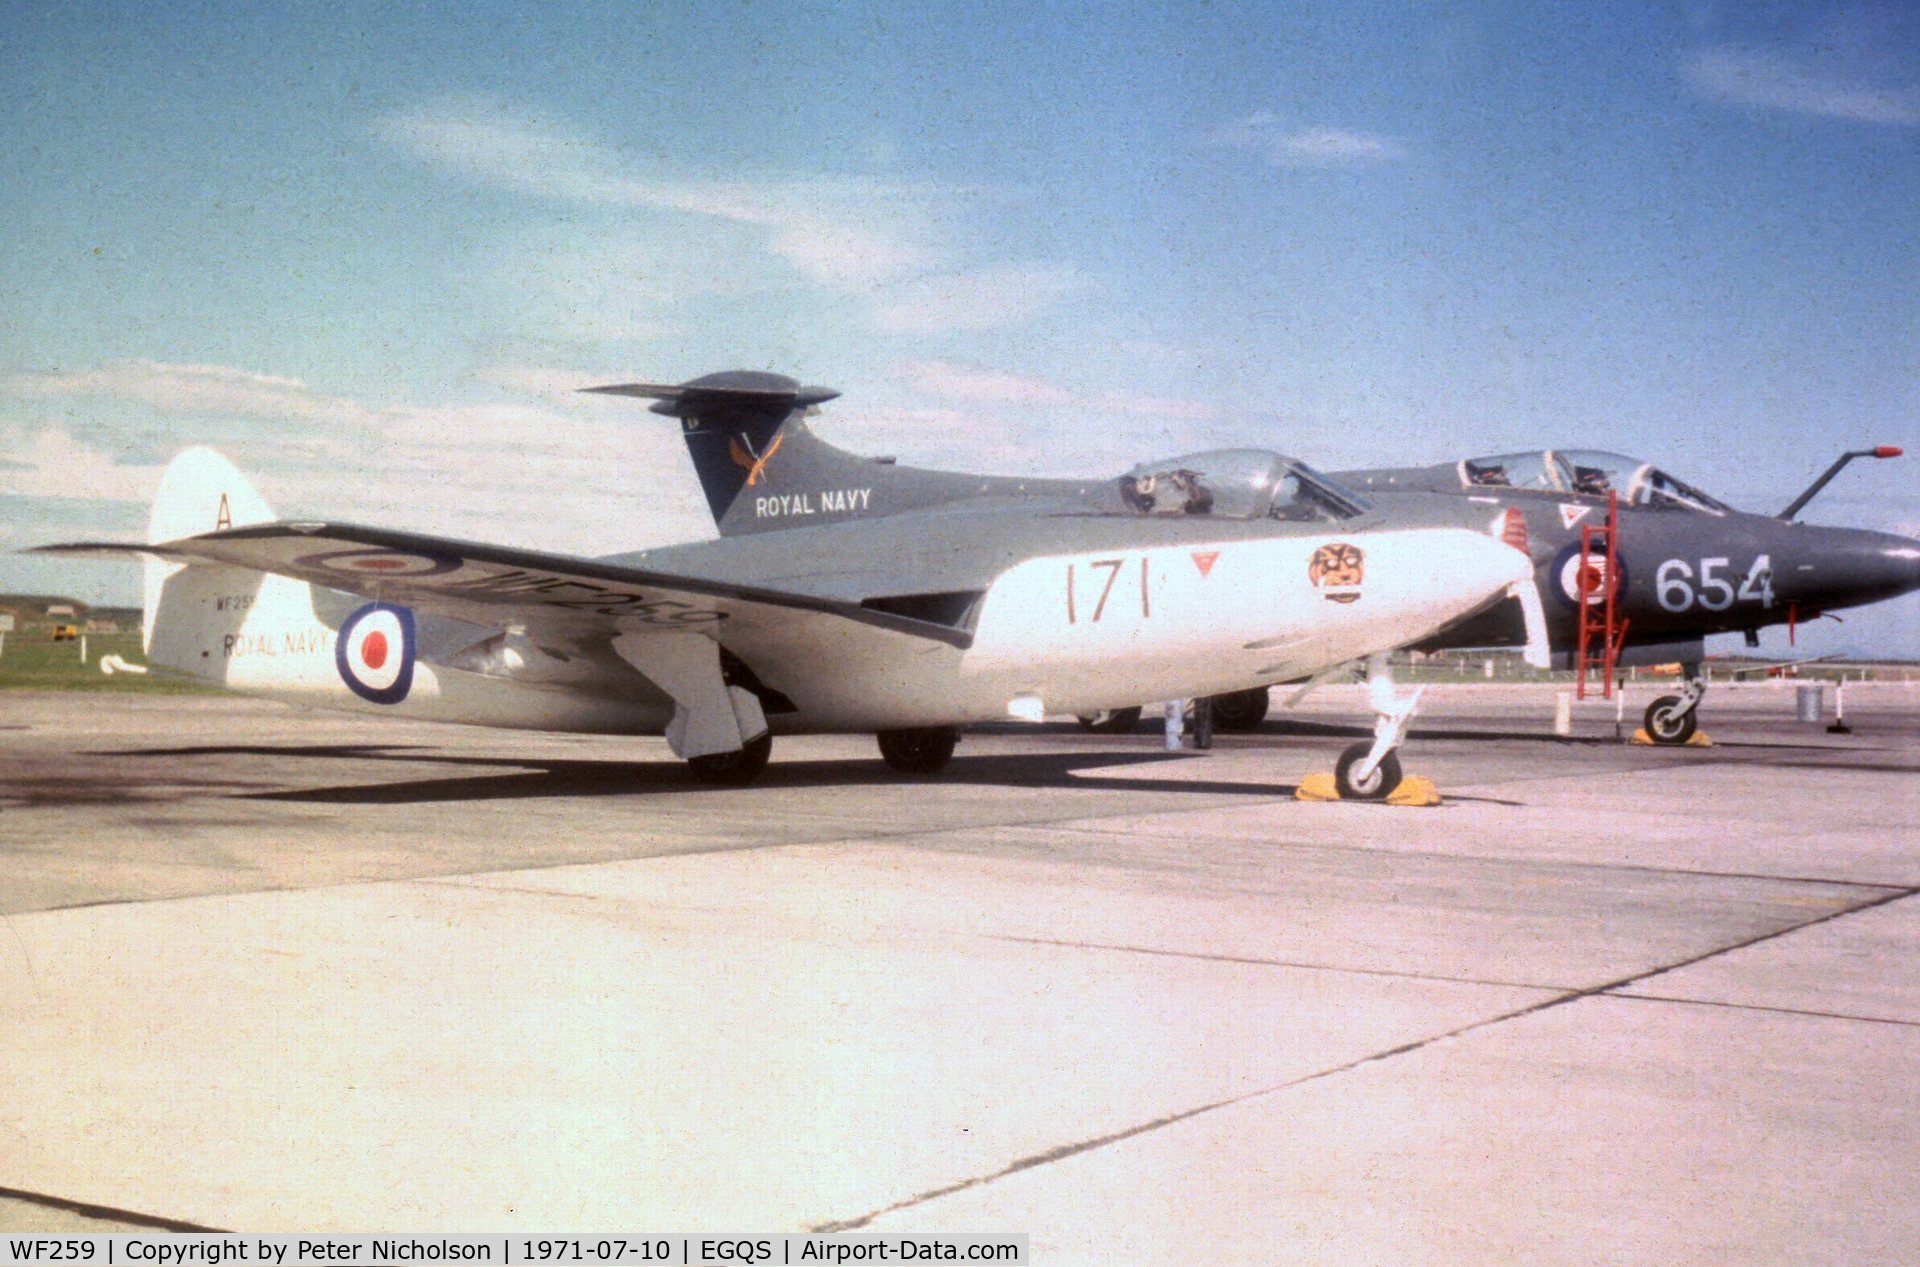 WF259, 1954 Hawker Sea Hawk F.2 C/N 5916, Sea Hawk F.2 at the 1971 RNAS Lossiemouth Open Day. The following year this aircraft was transferred to the Royal Scottish Museum at East Fortune where it still remains.